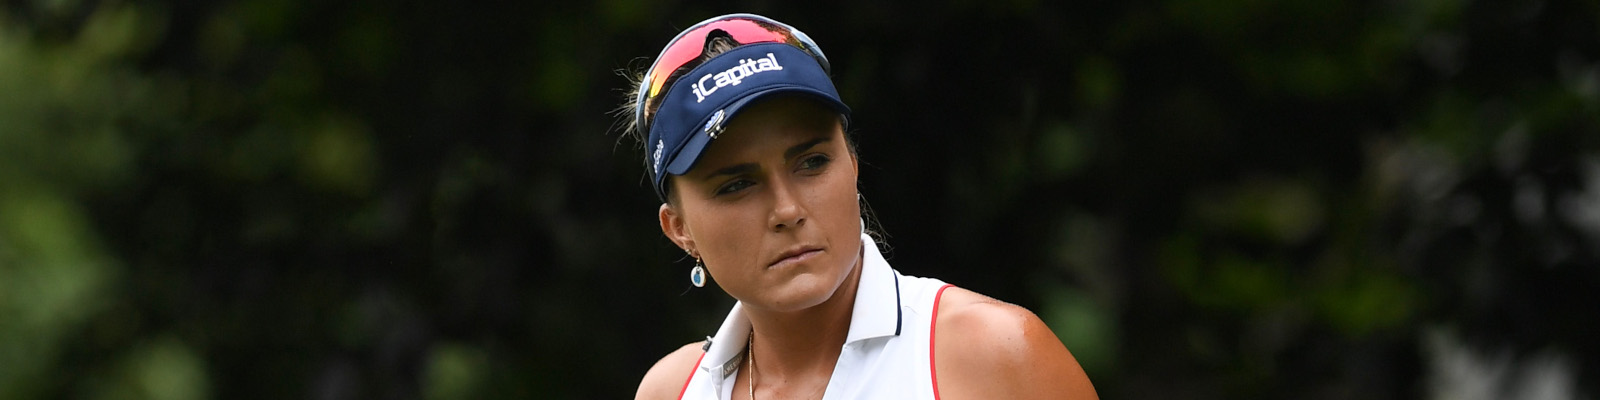 Lexi Thompson (Photo by Steve Dykes/Getty Images)